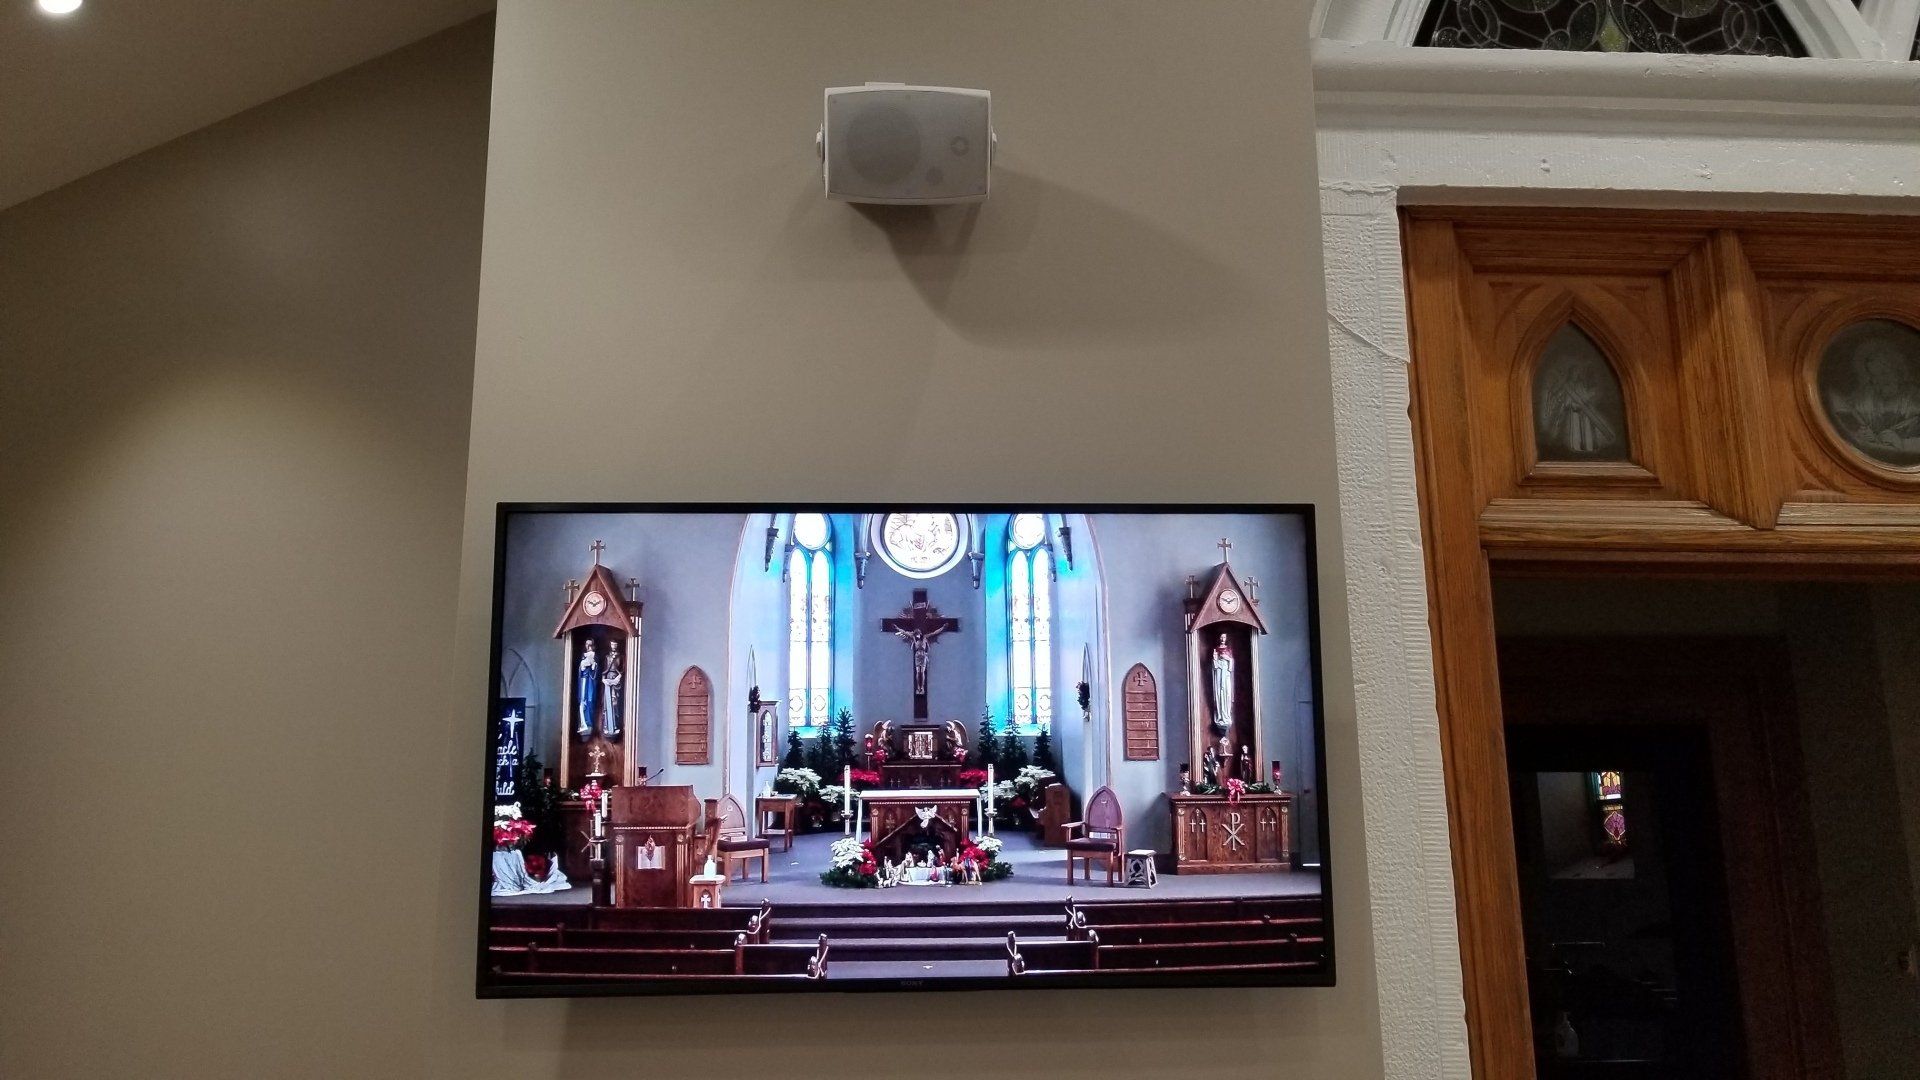 a large flat screen tv shows the inside of a church in northern ohio